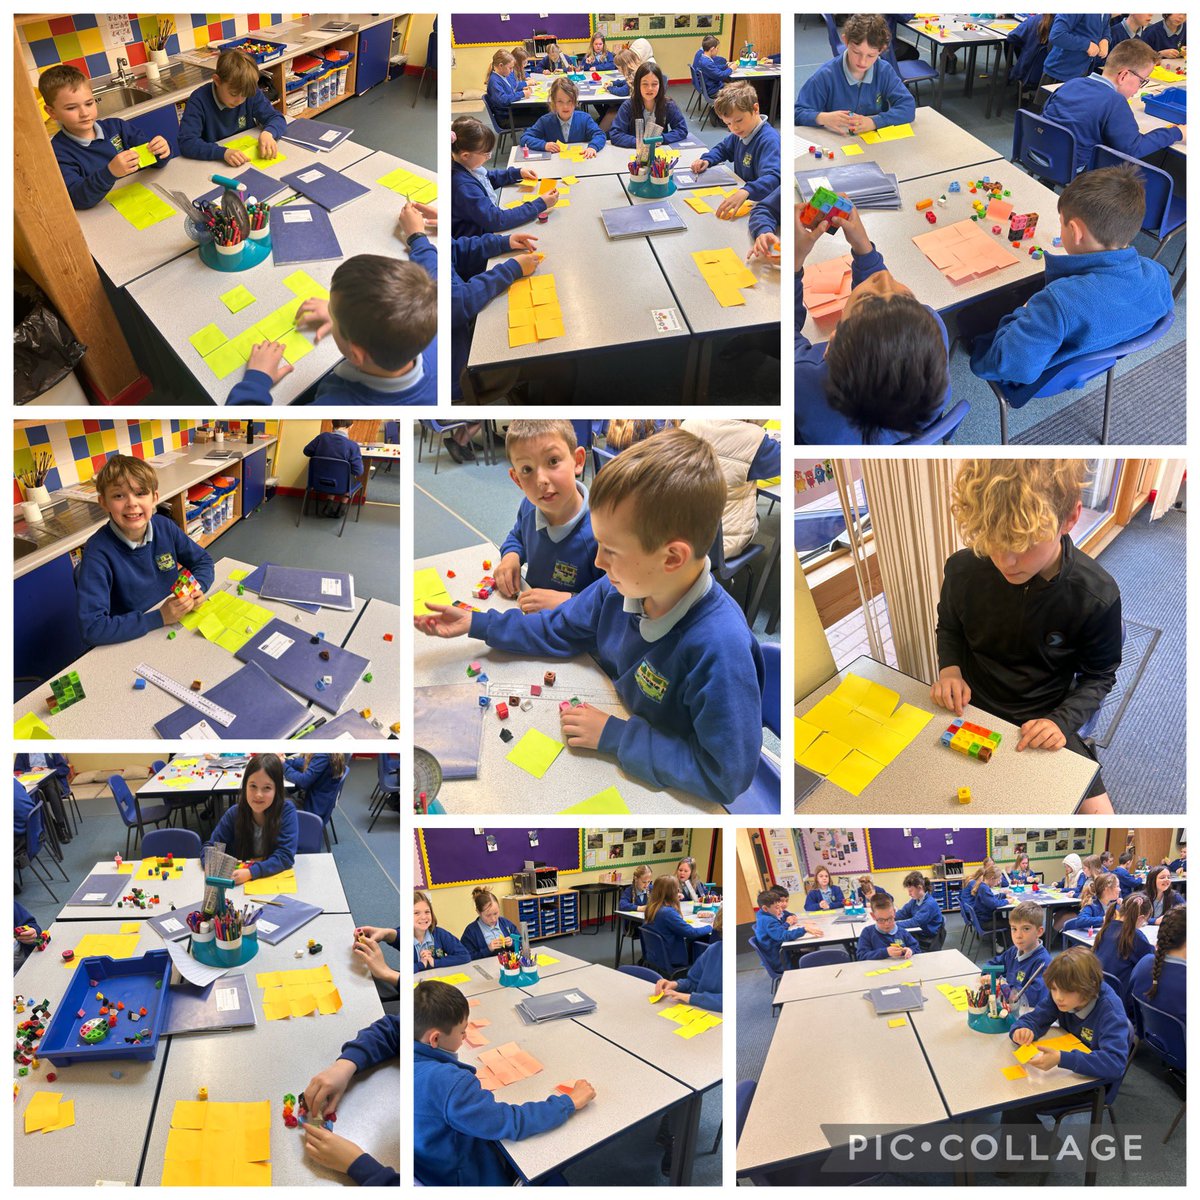 Year 5 working hard on their maths this week - calculating area of regular and irregular shapes! 🙌🏼⭐️ I am proud of your hard work and creative thinking everyone! ⭐️